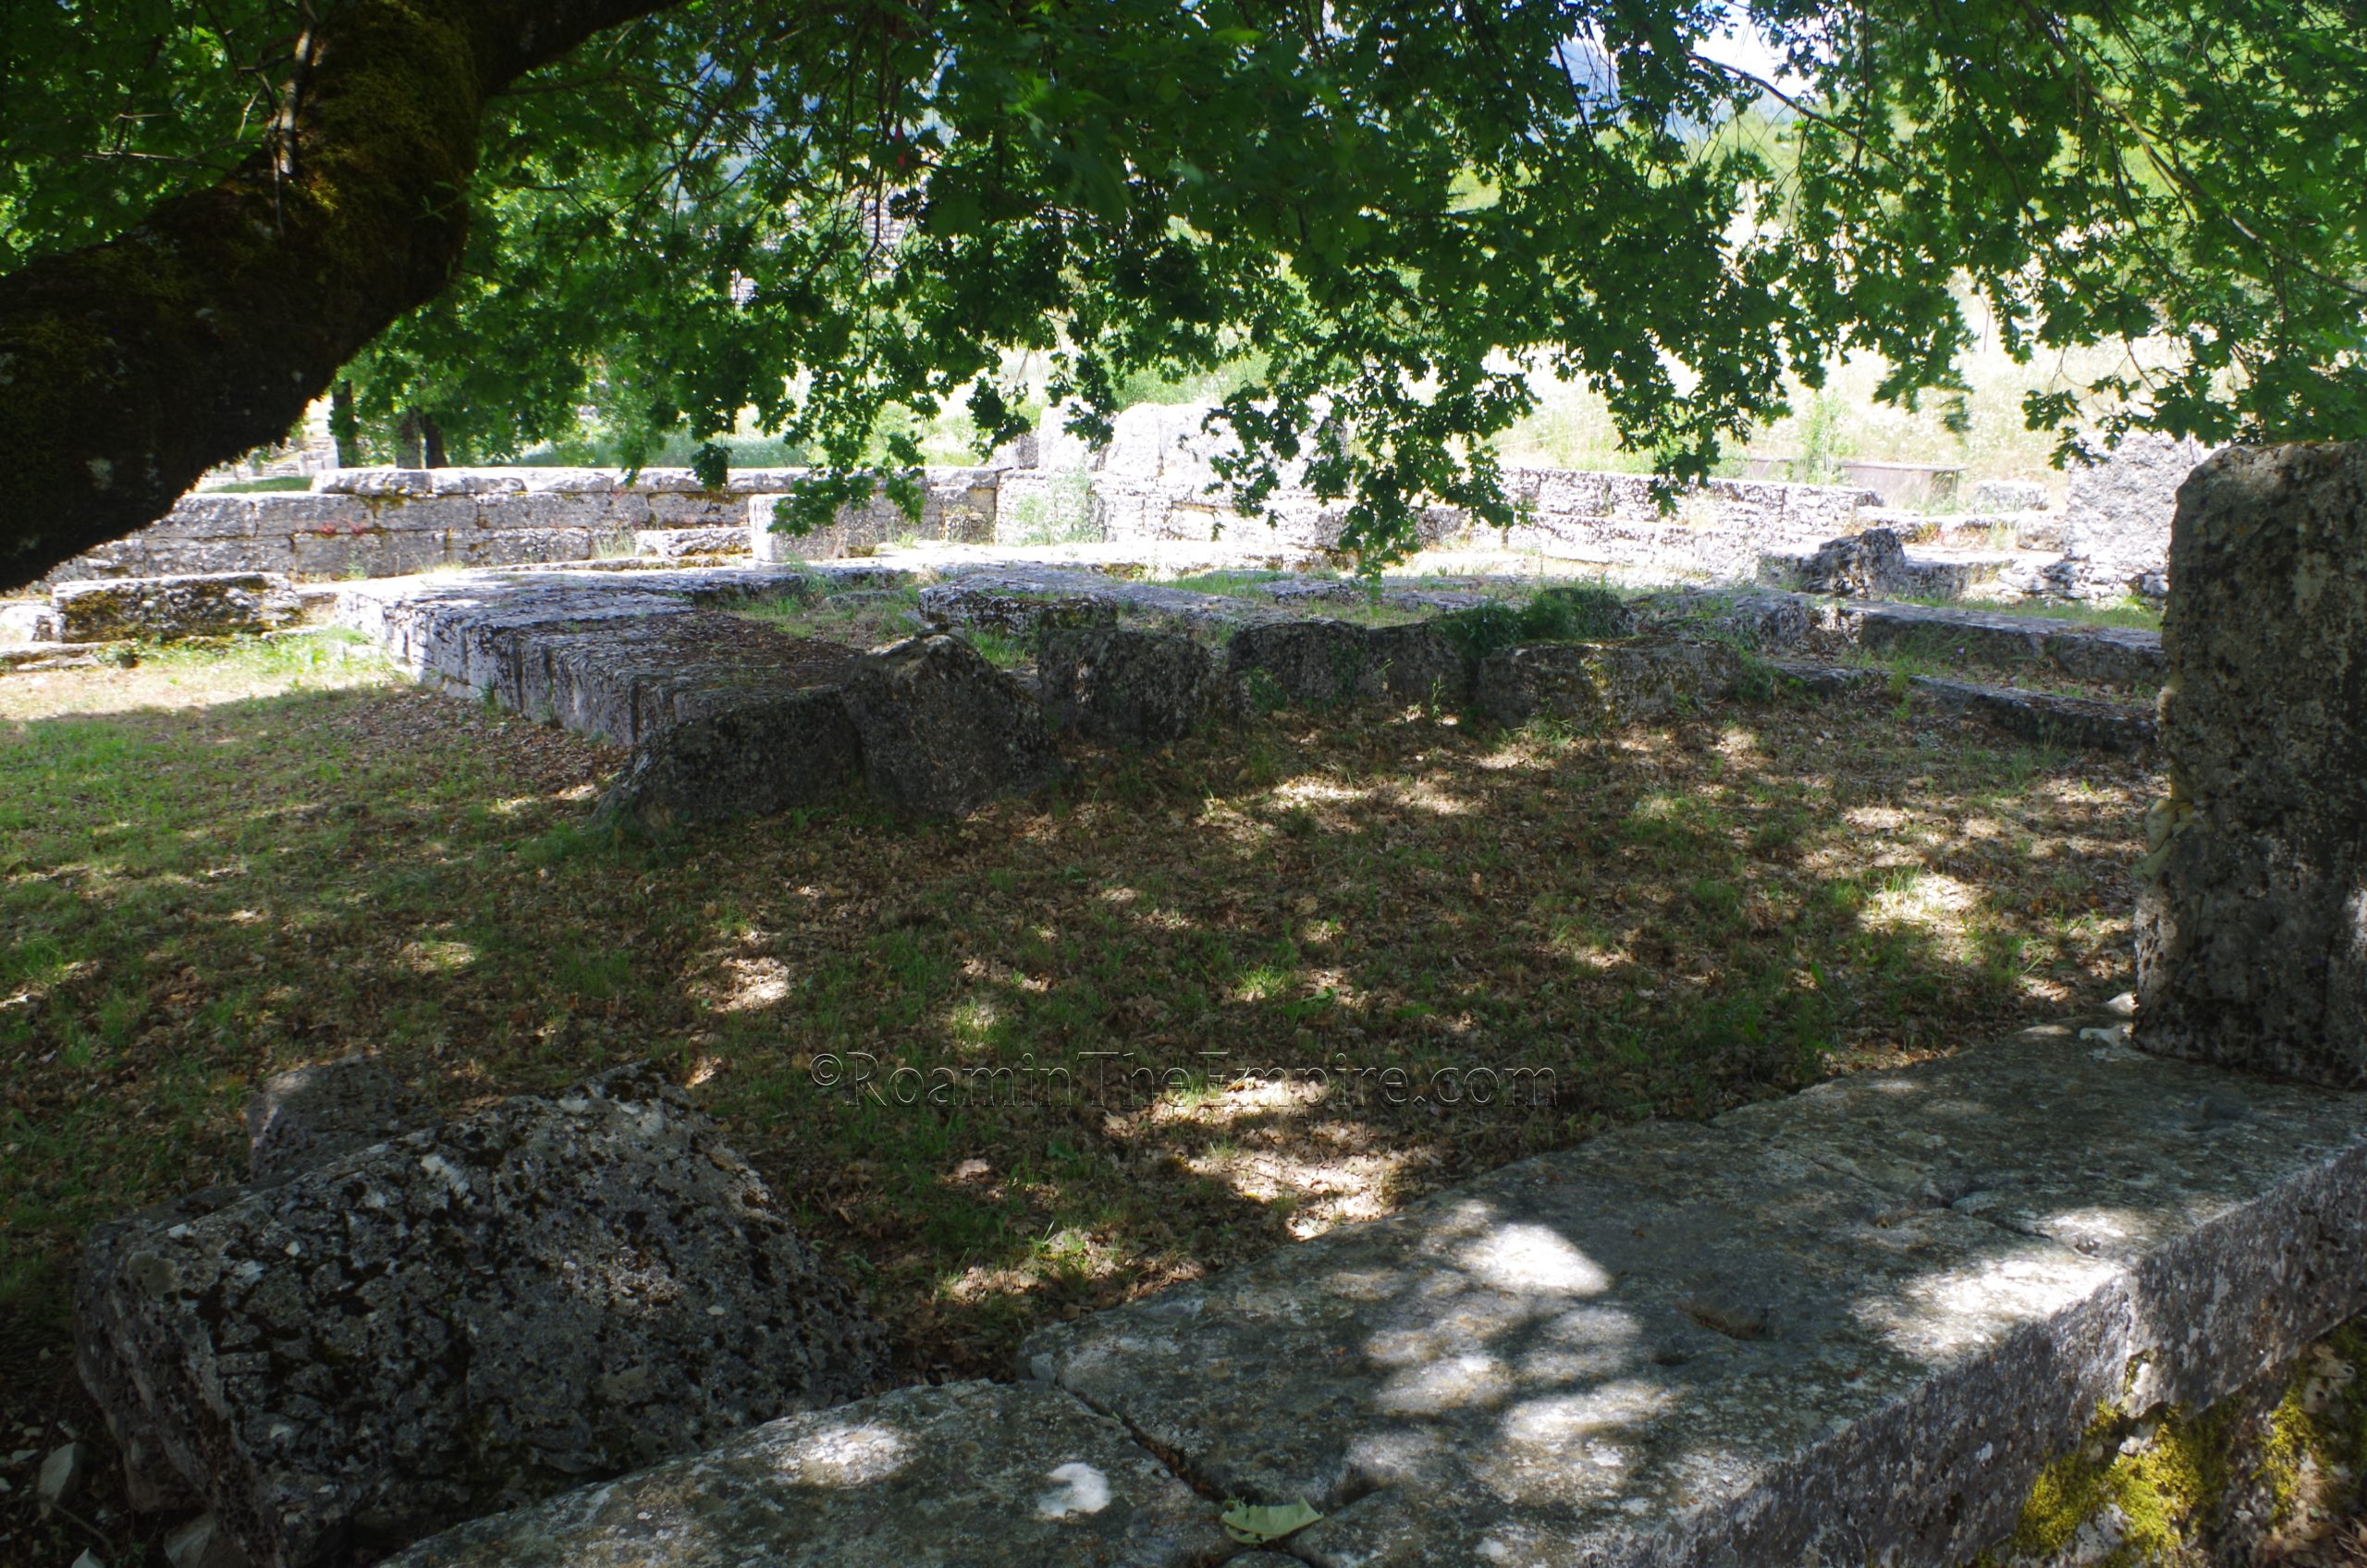 Temple of Zeus and interior are of the Hiera Oikia.